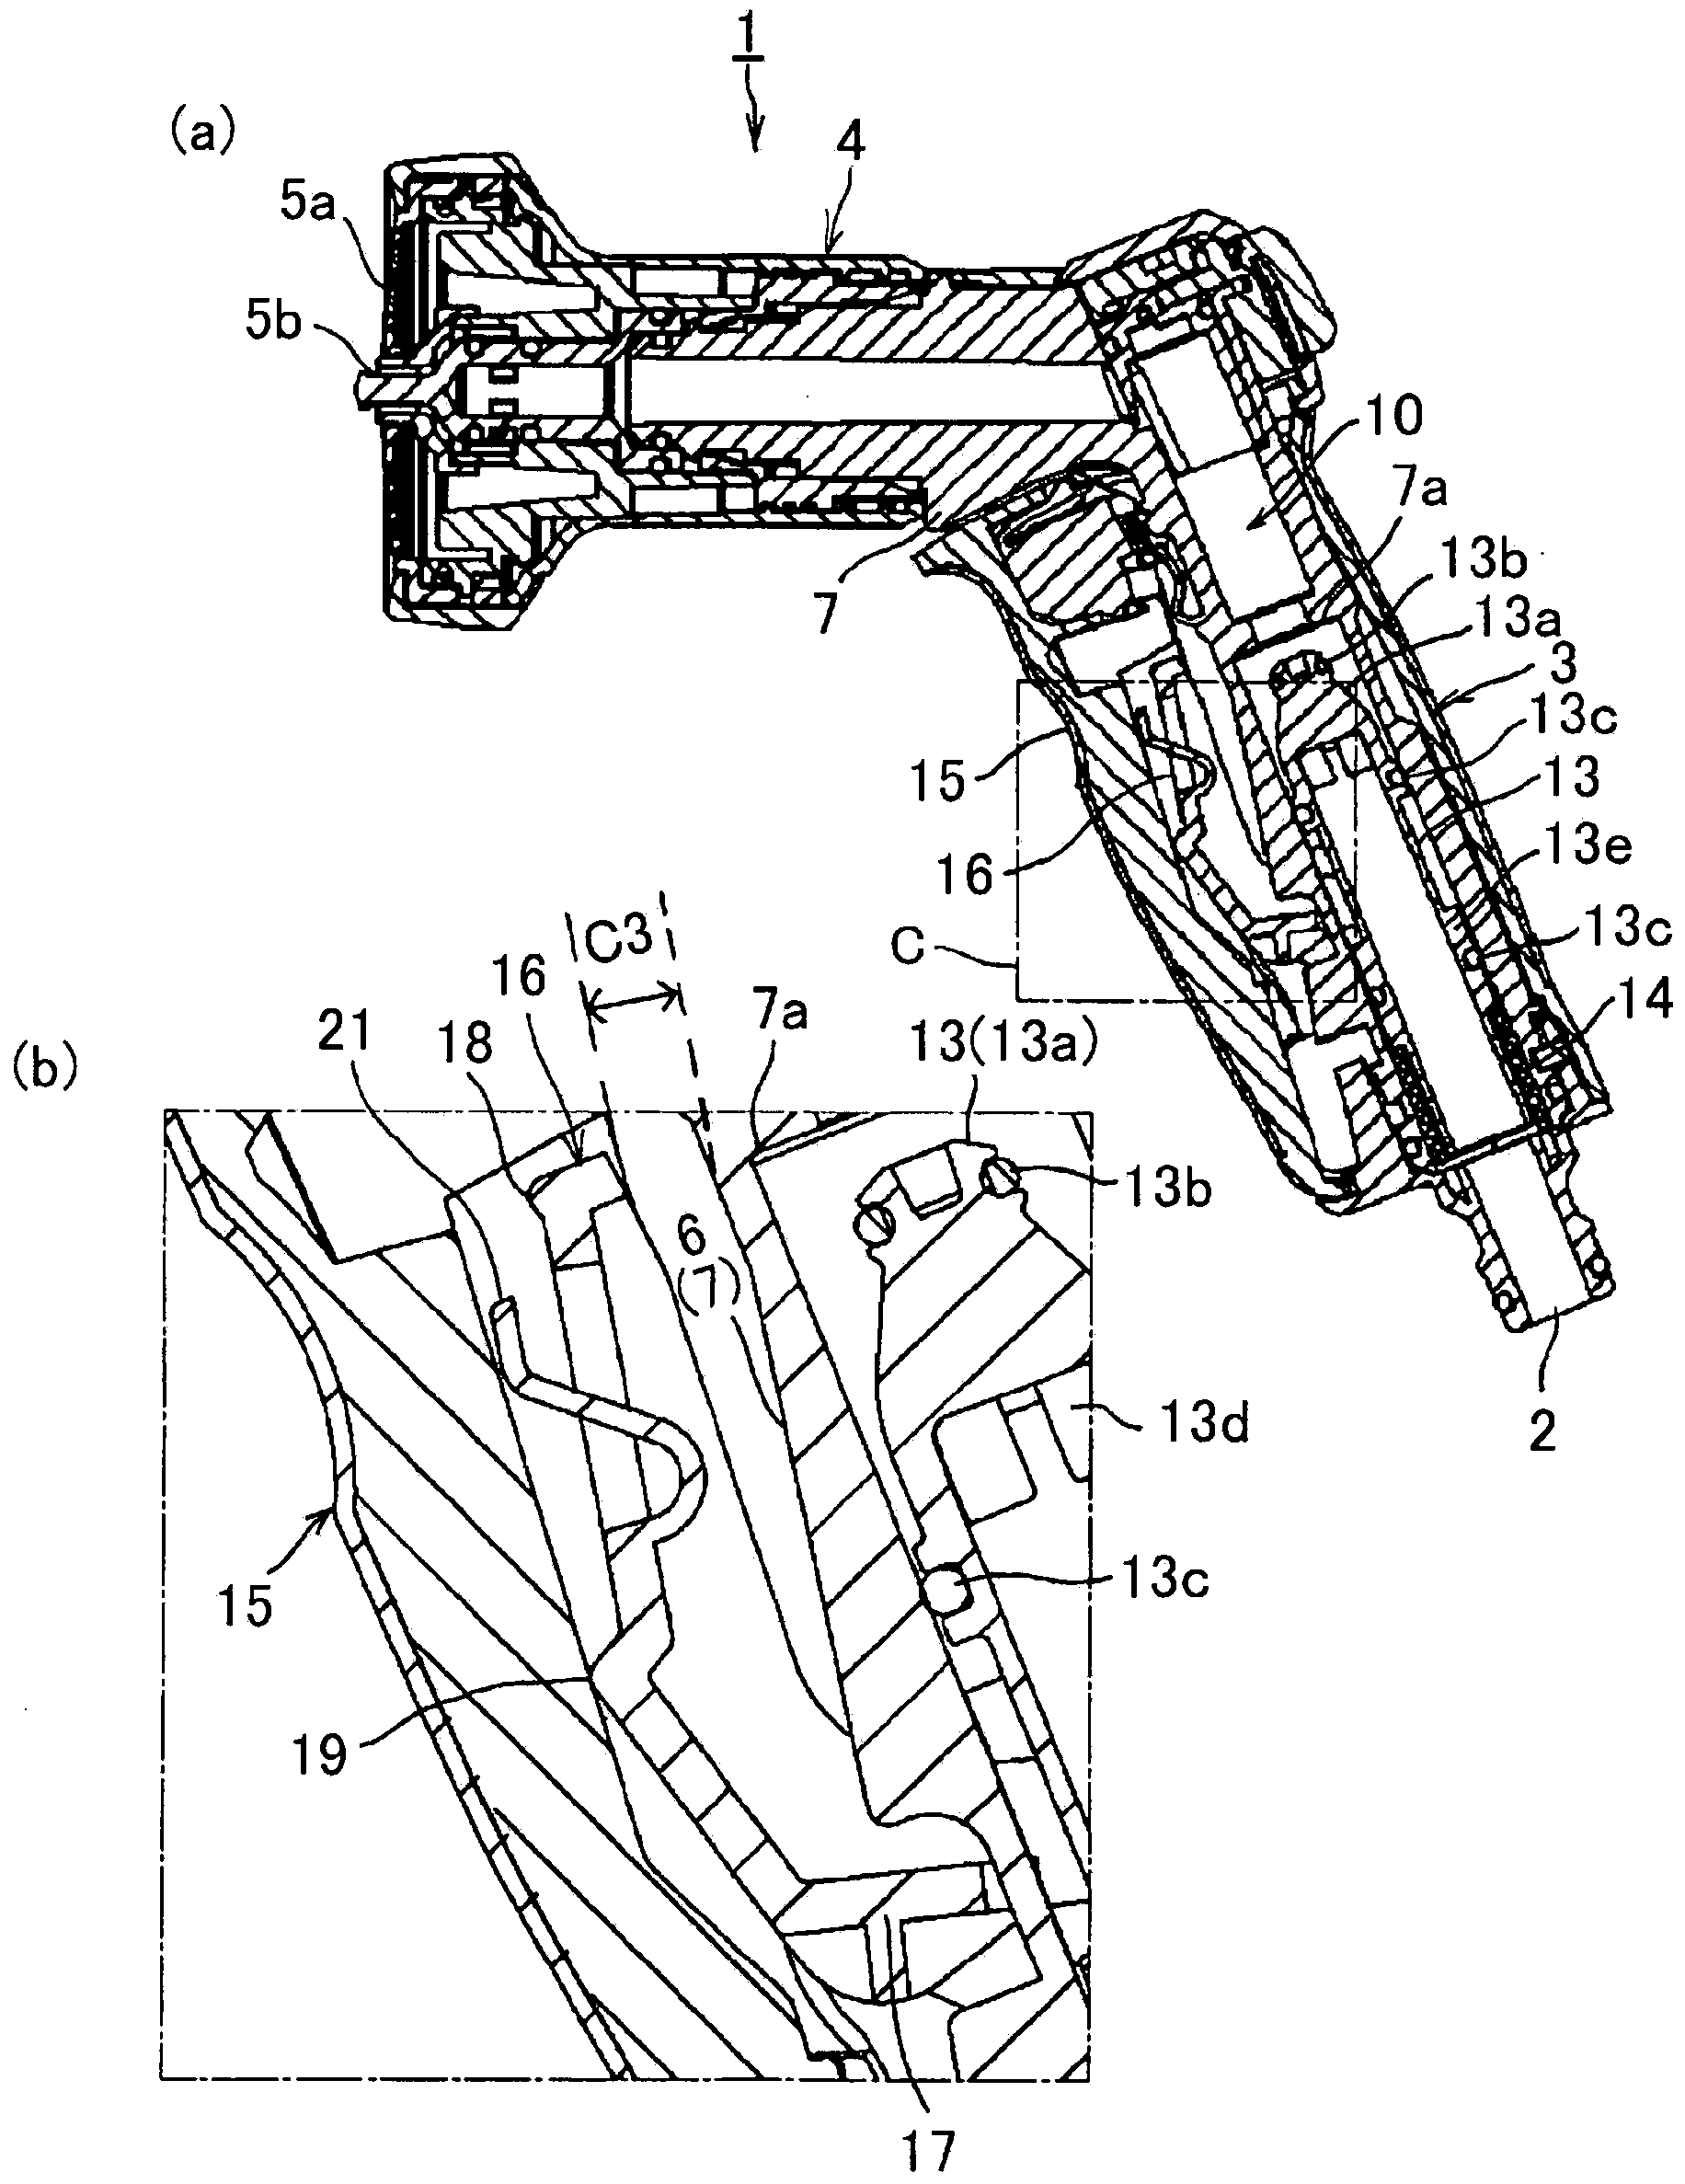 Water-spraying nozzle